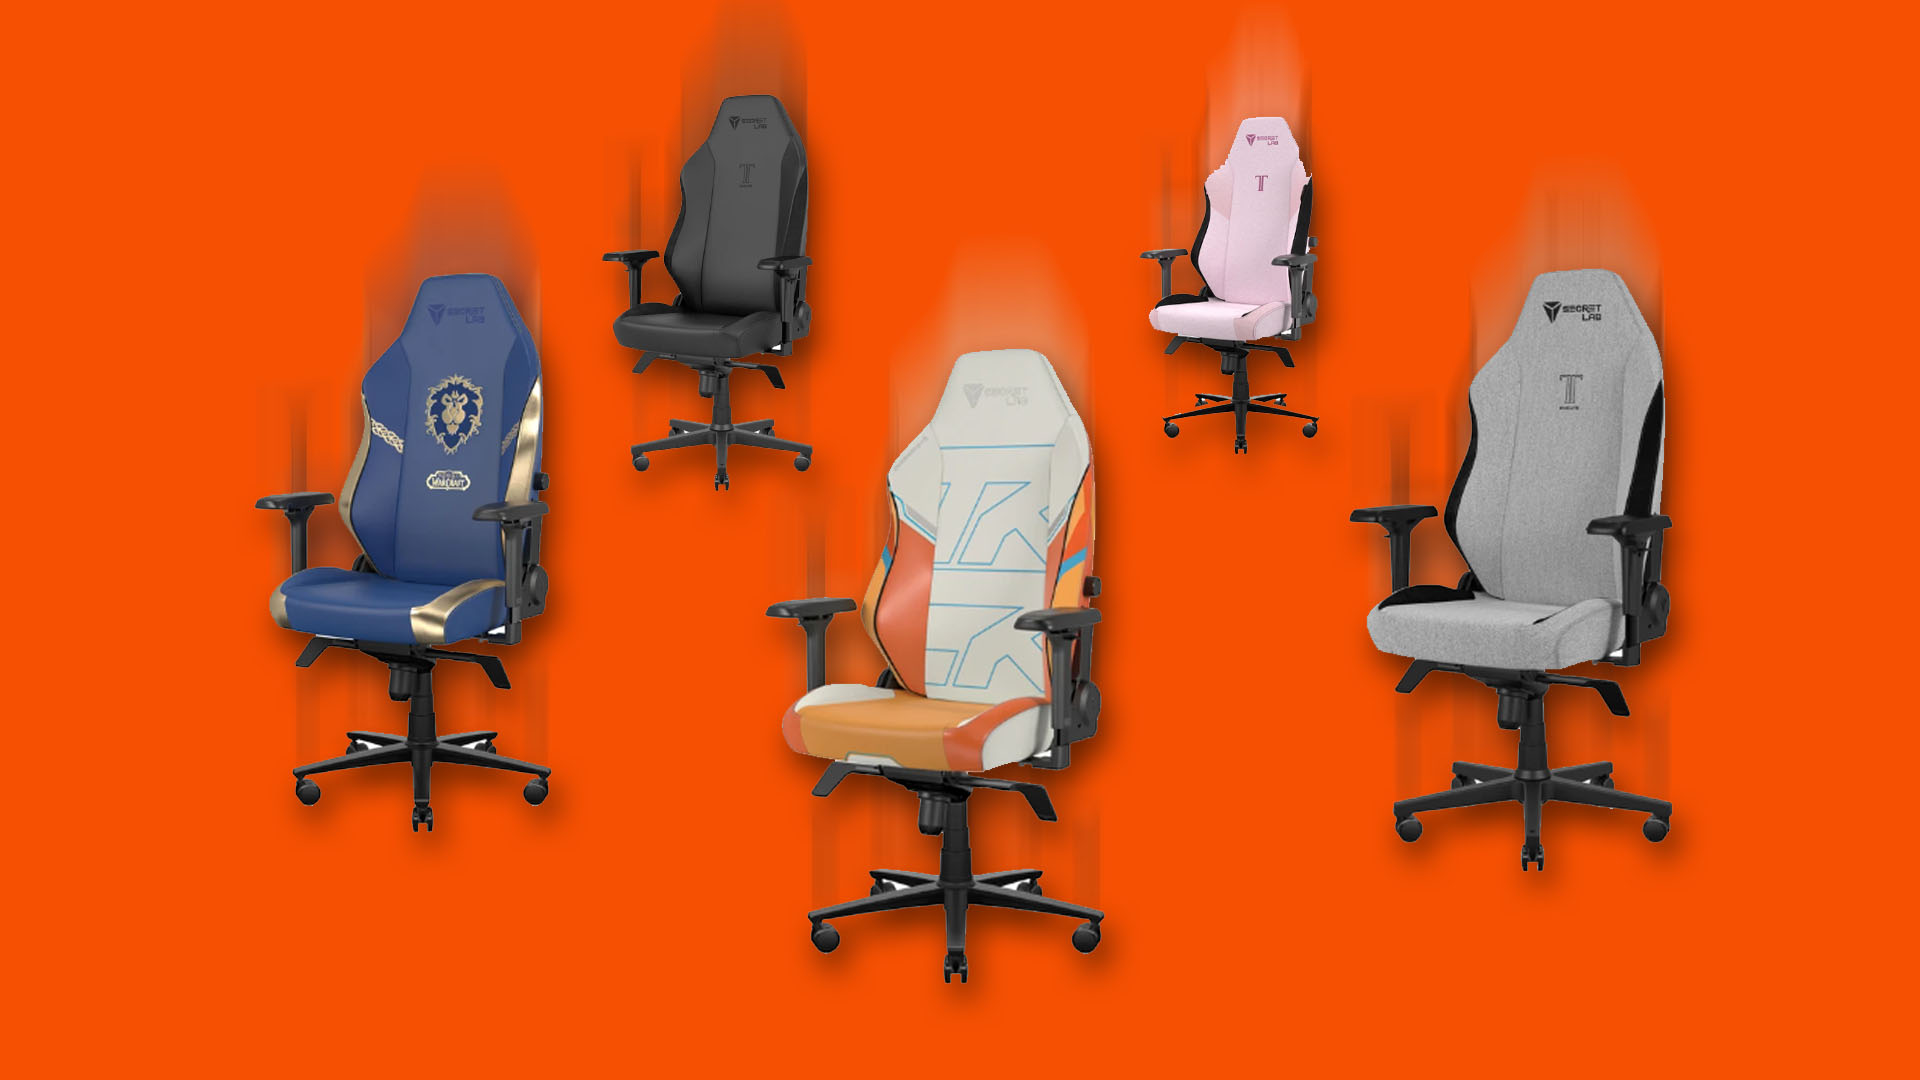 Save big on Secretlab gaming chairs in this limited time offer